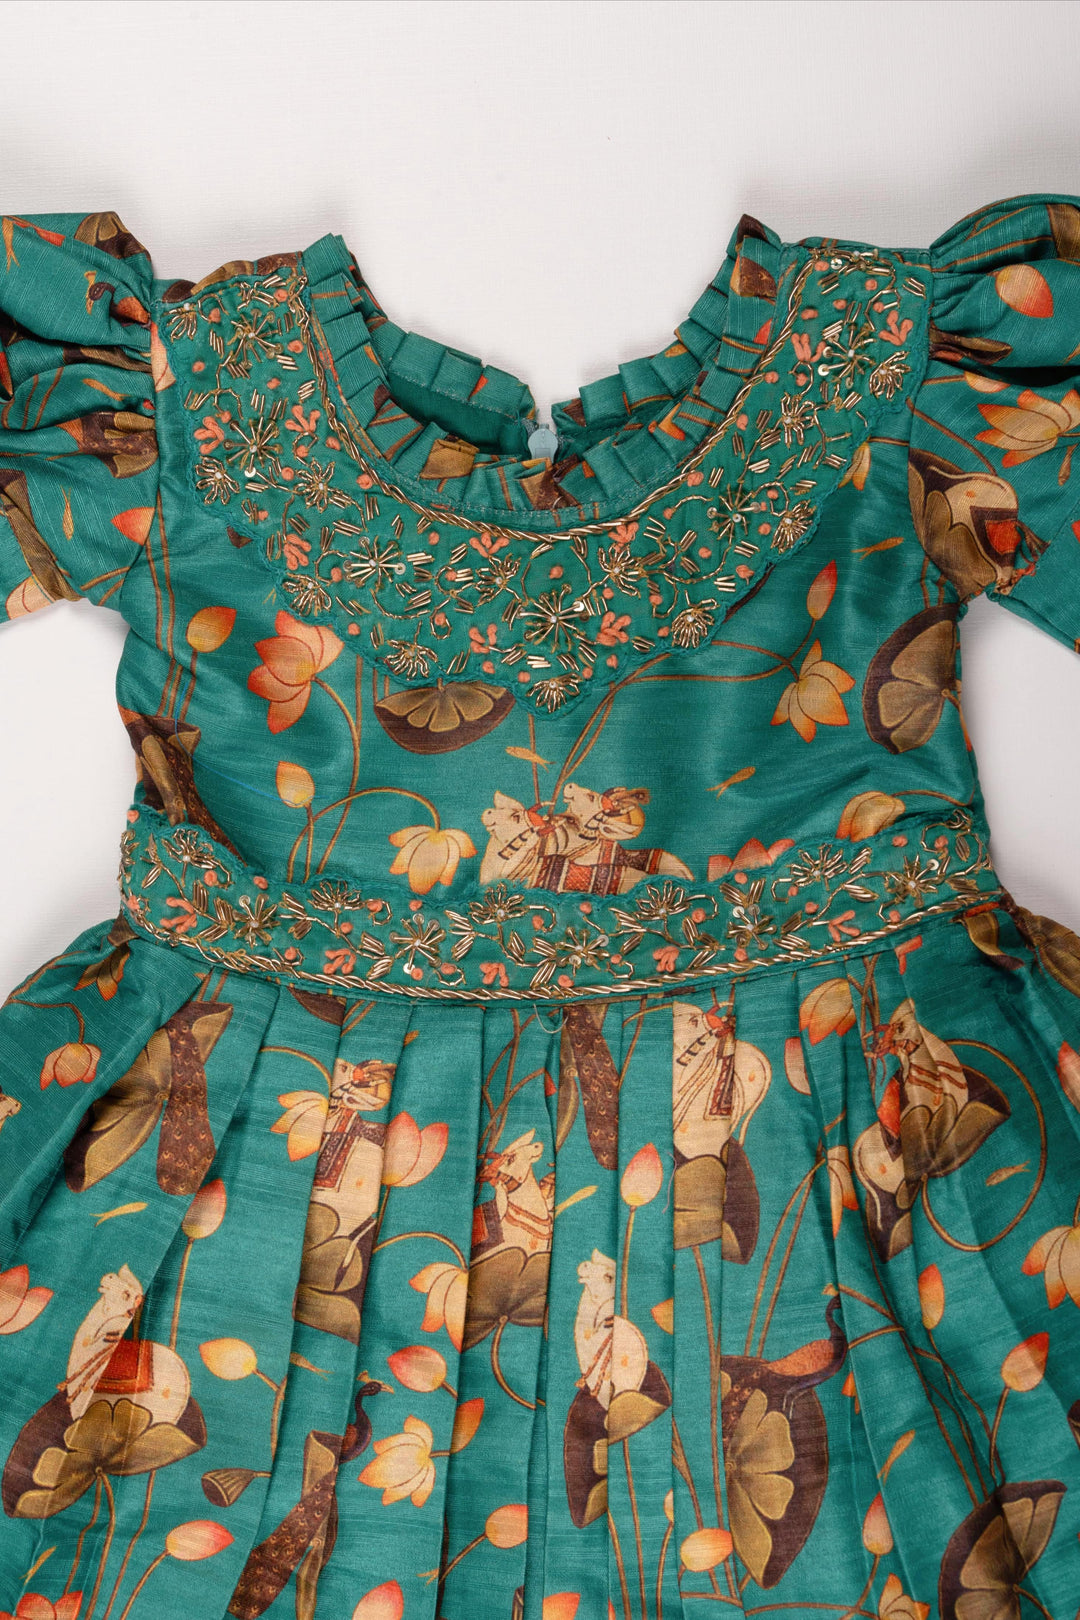 The Nesavu Girls Party Gown Girls  Emerald Green Floral Printed Anarkali Gown with Traditional Motifs Nesavu Traditional Emerald Green Anarkali Gown for Girls with Floral Print | The Nesavu